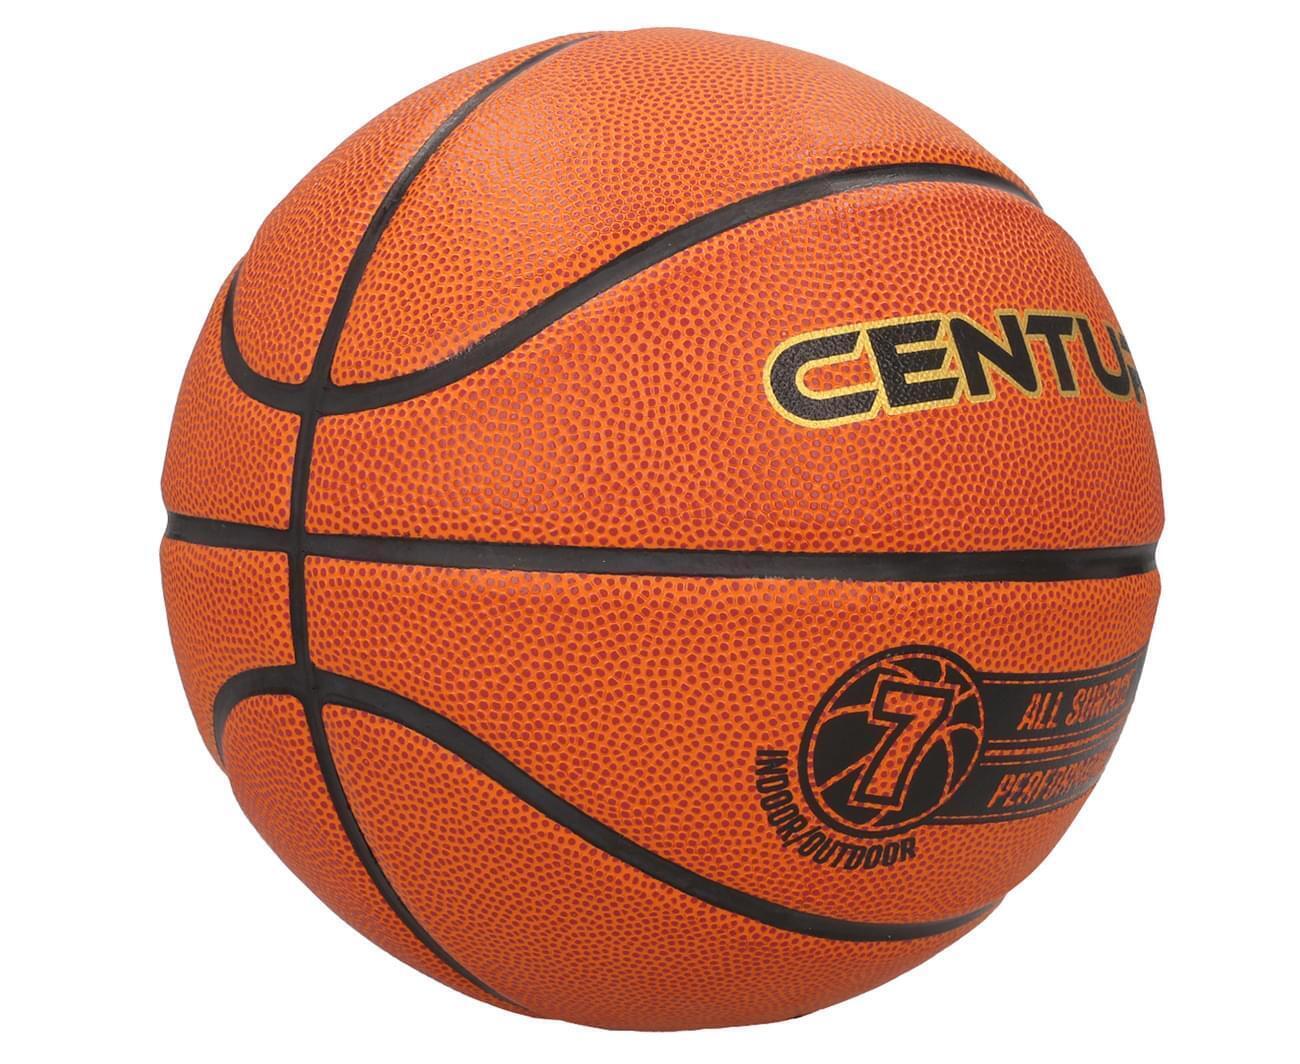 Century All-Surface Laminated Size 7 Basketball Indoor/Outdoor BBall